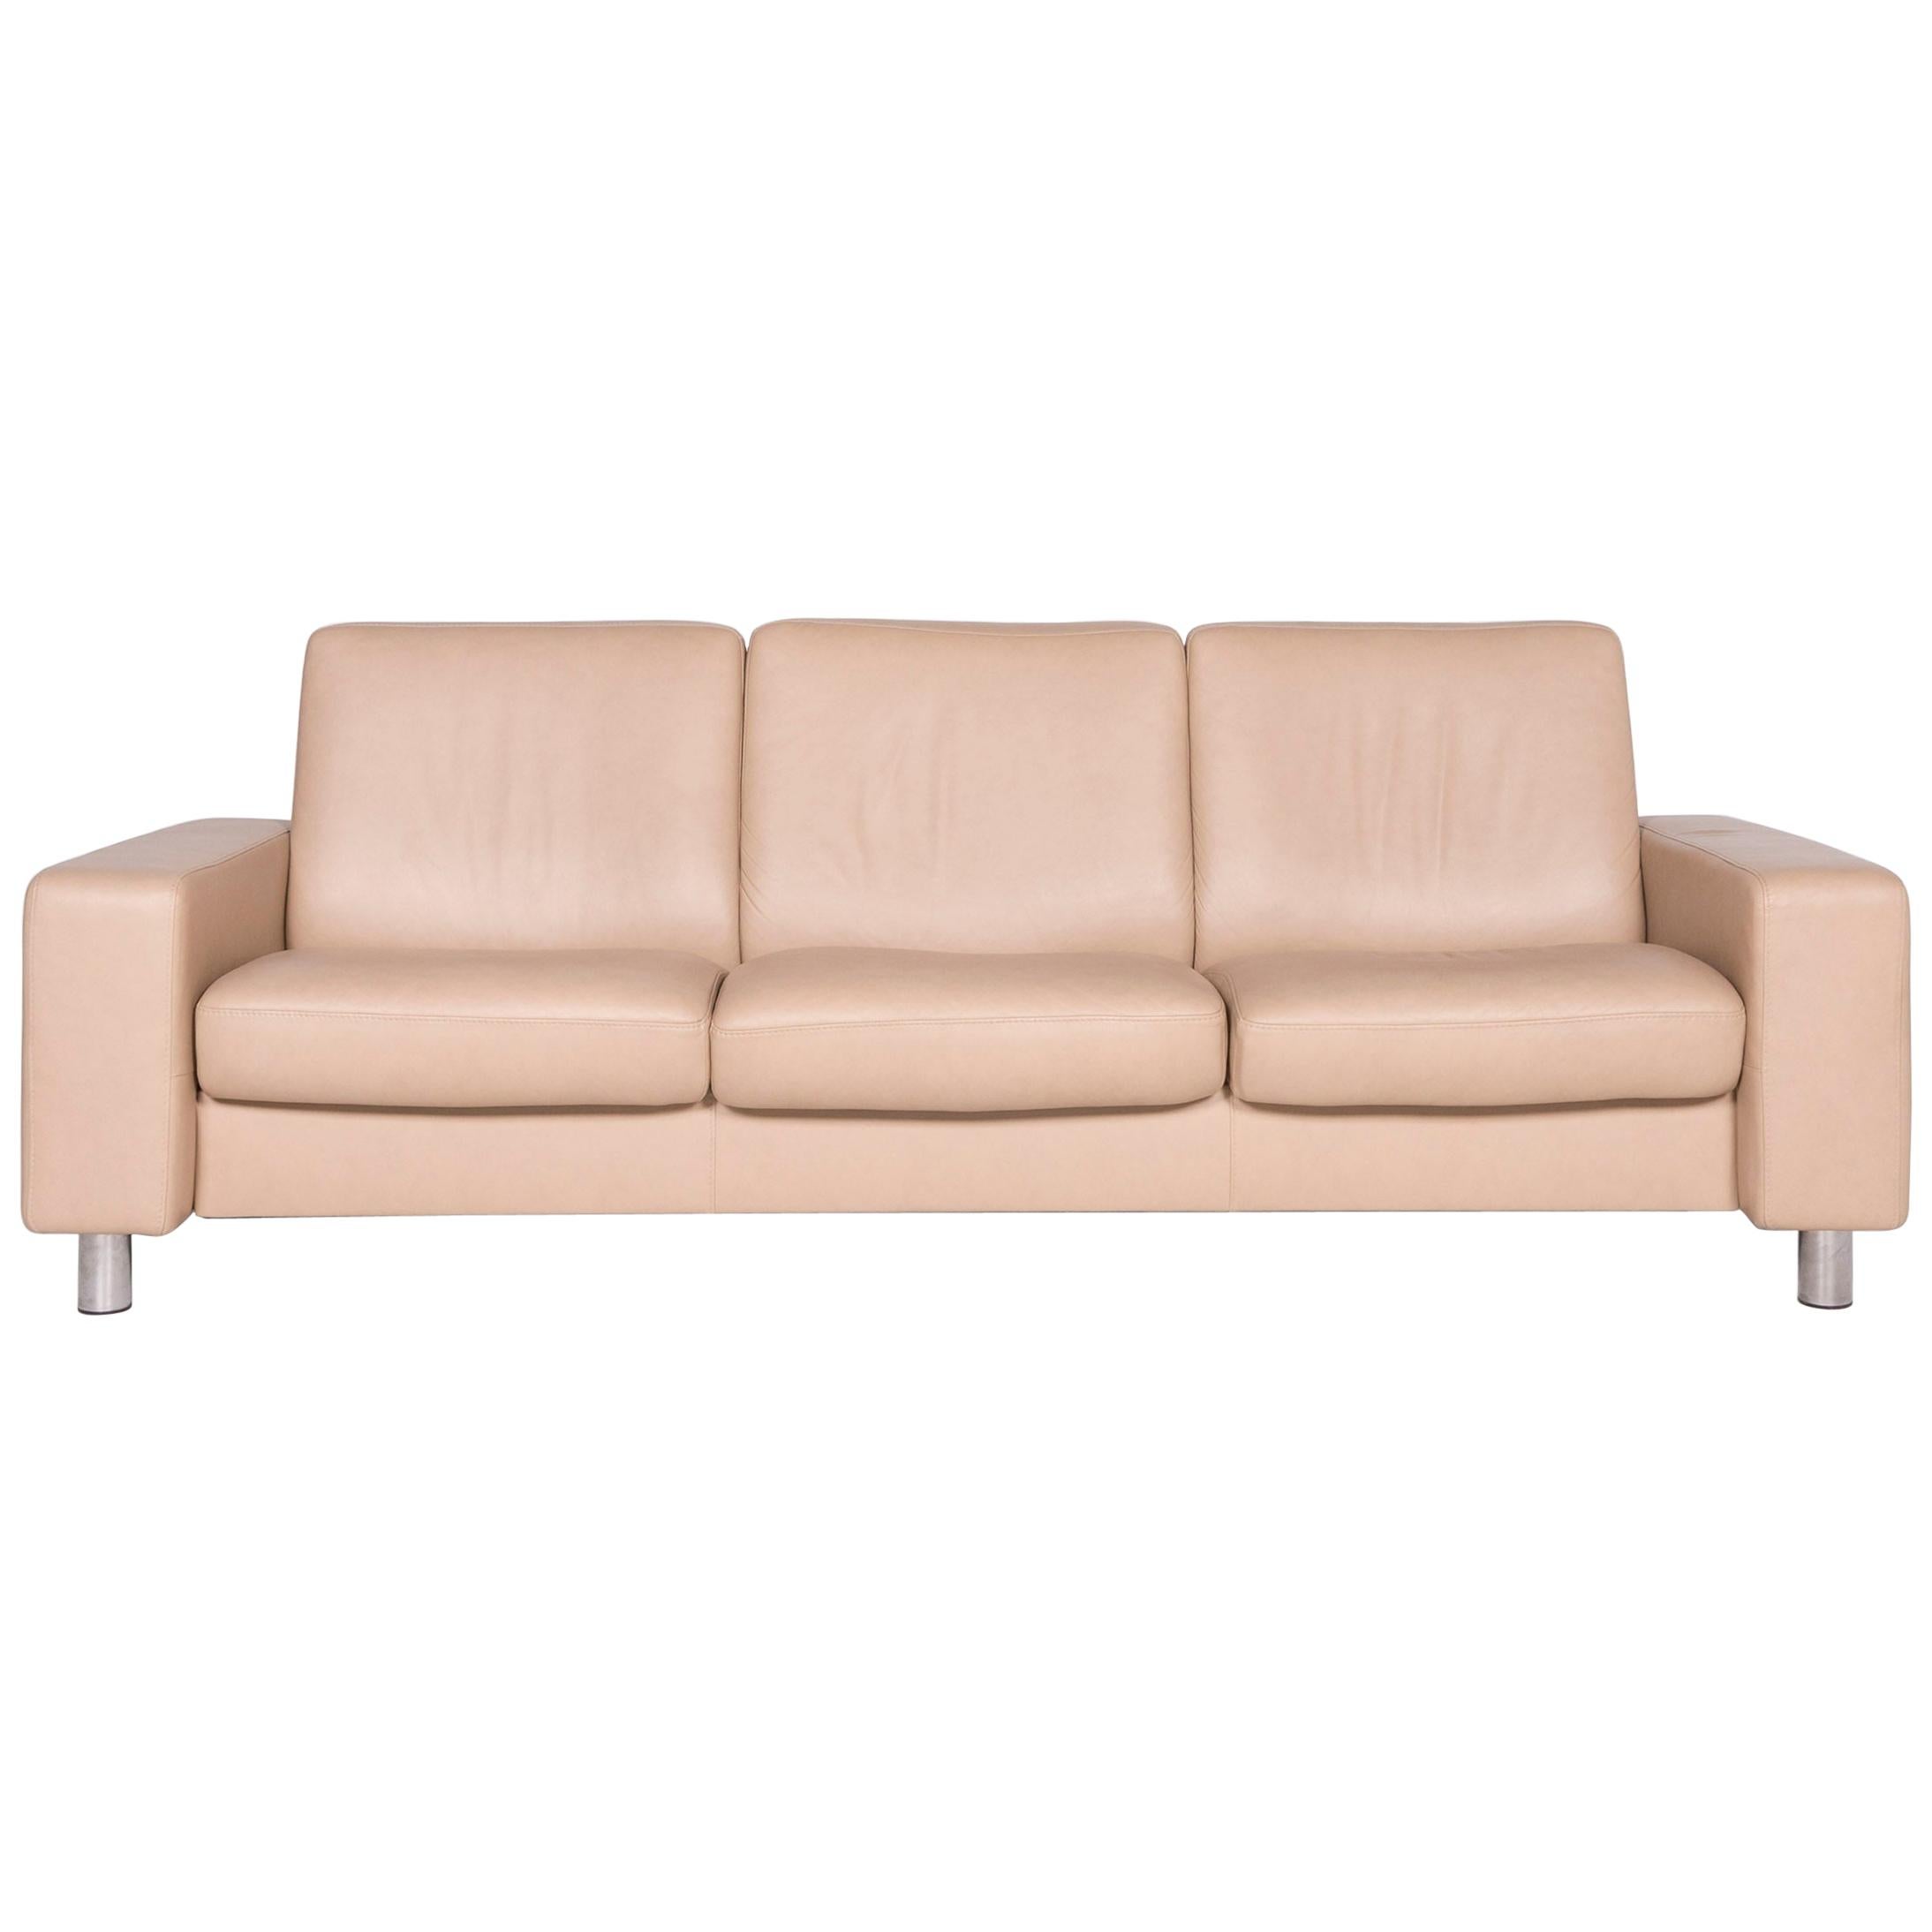 Stressless Designer Leather Sofa Beige Genuine Leather Three-Seat Couch For Sale